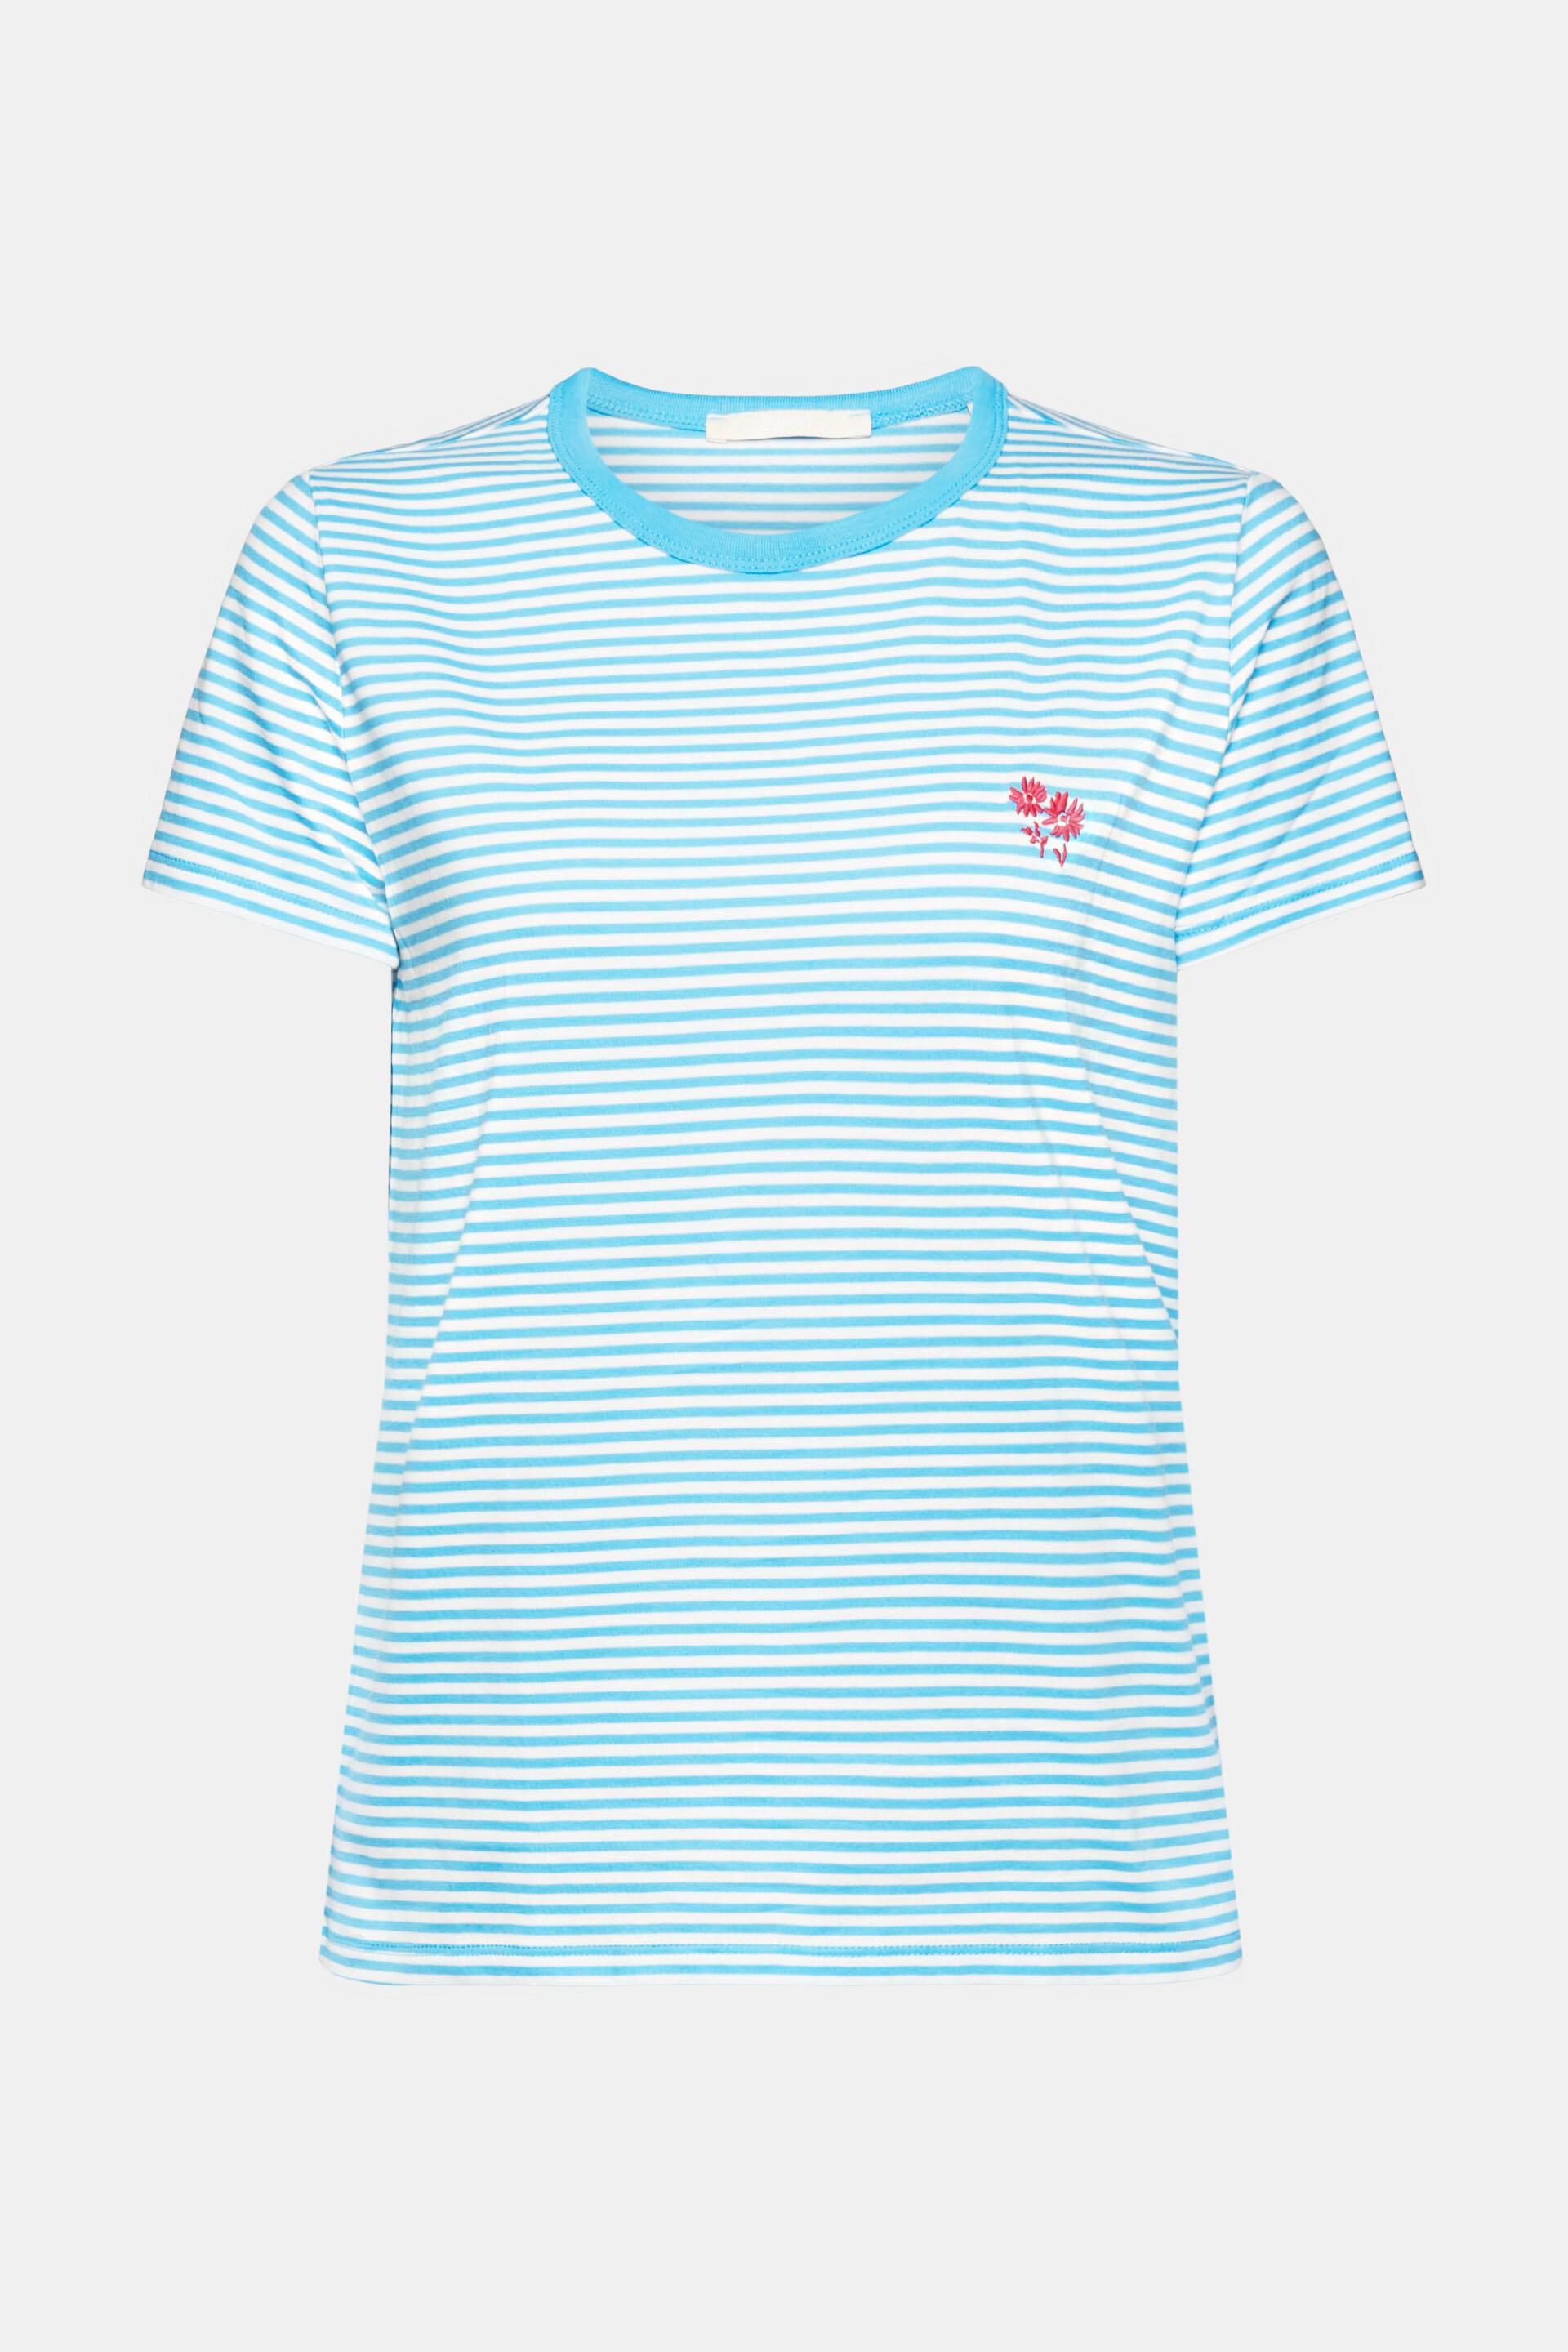 ESPRIT - Striped t-shirt with embroidered flower at our online shop